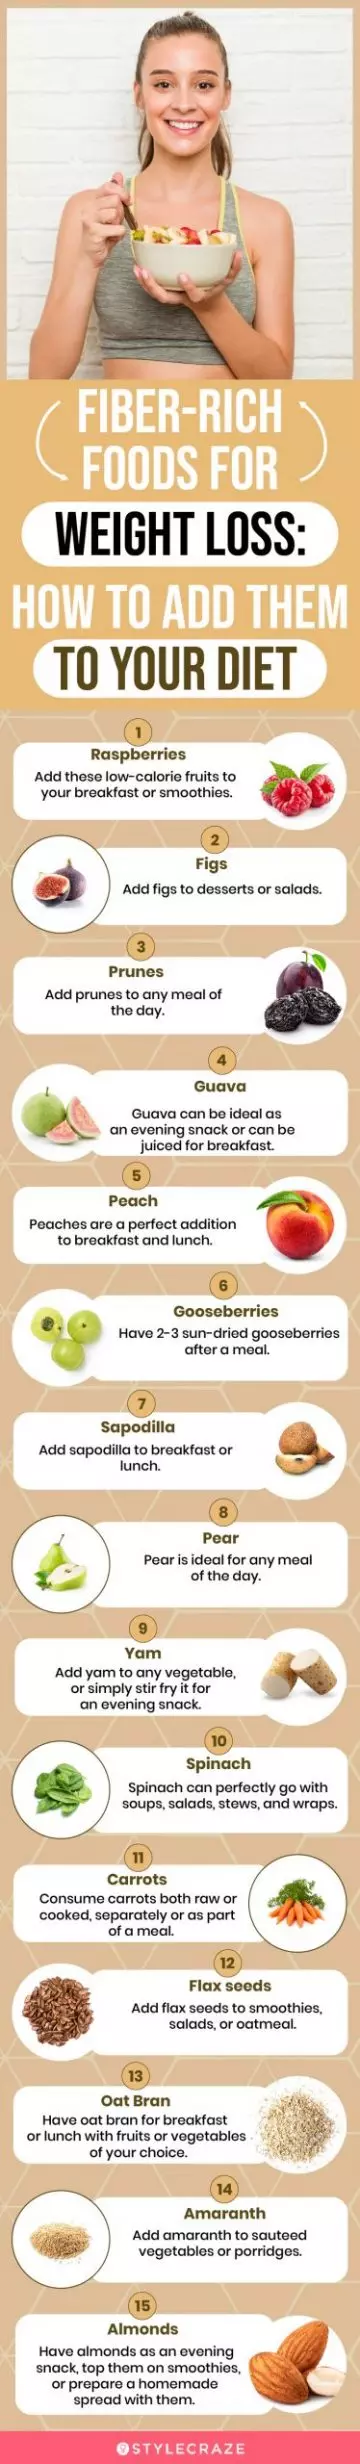 fiber rich foods for weight loss(infographic)